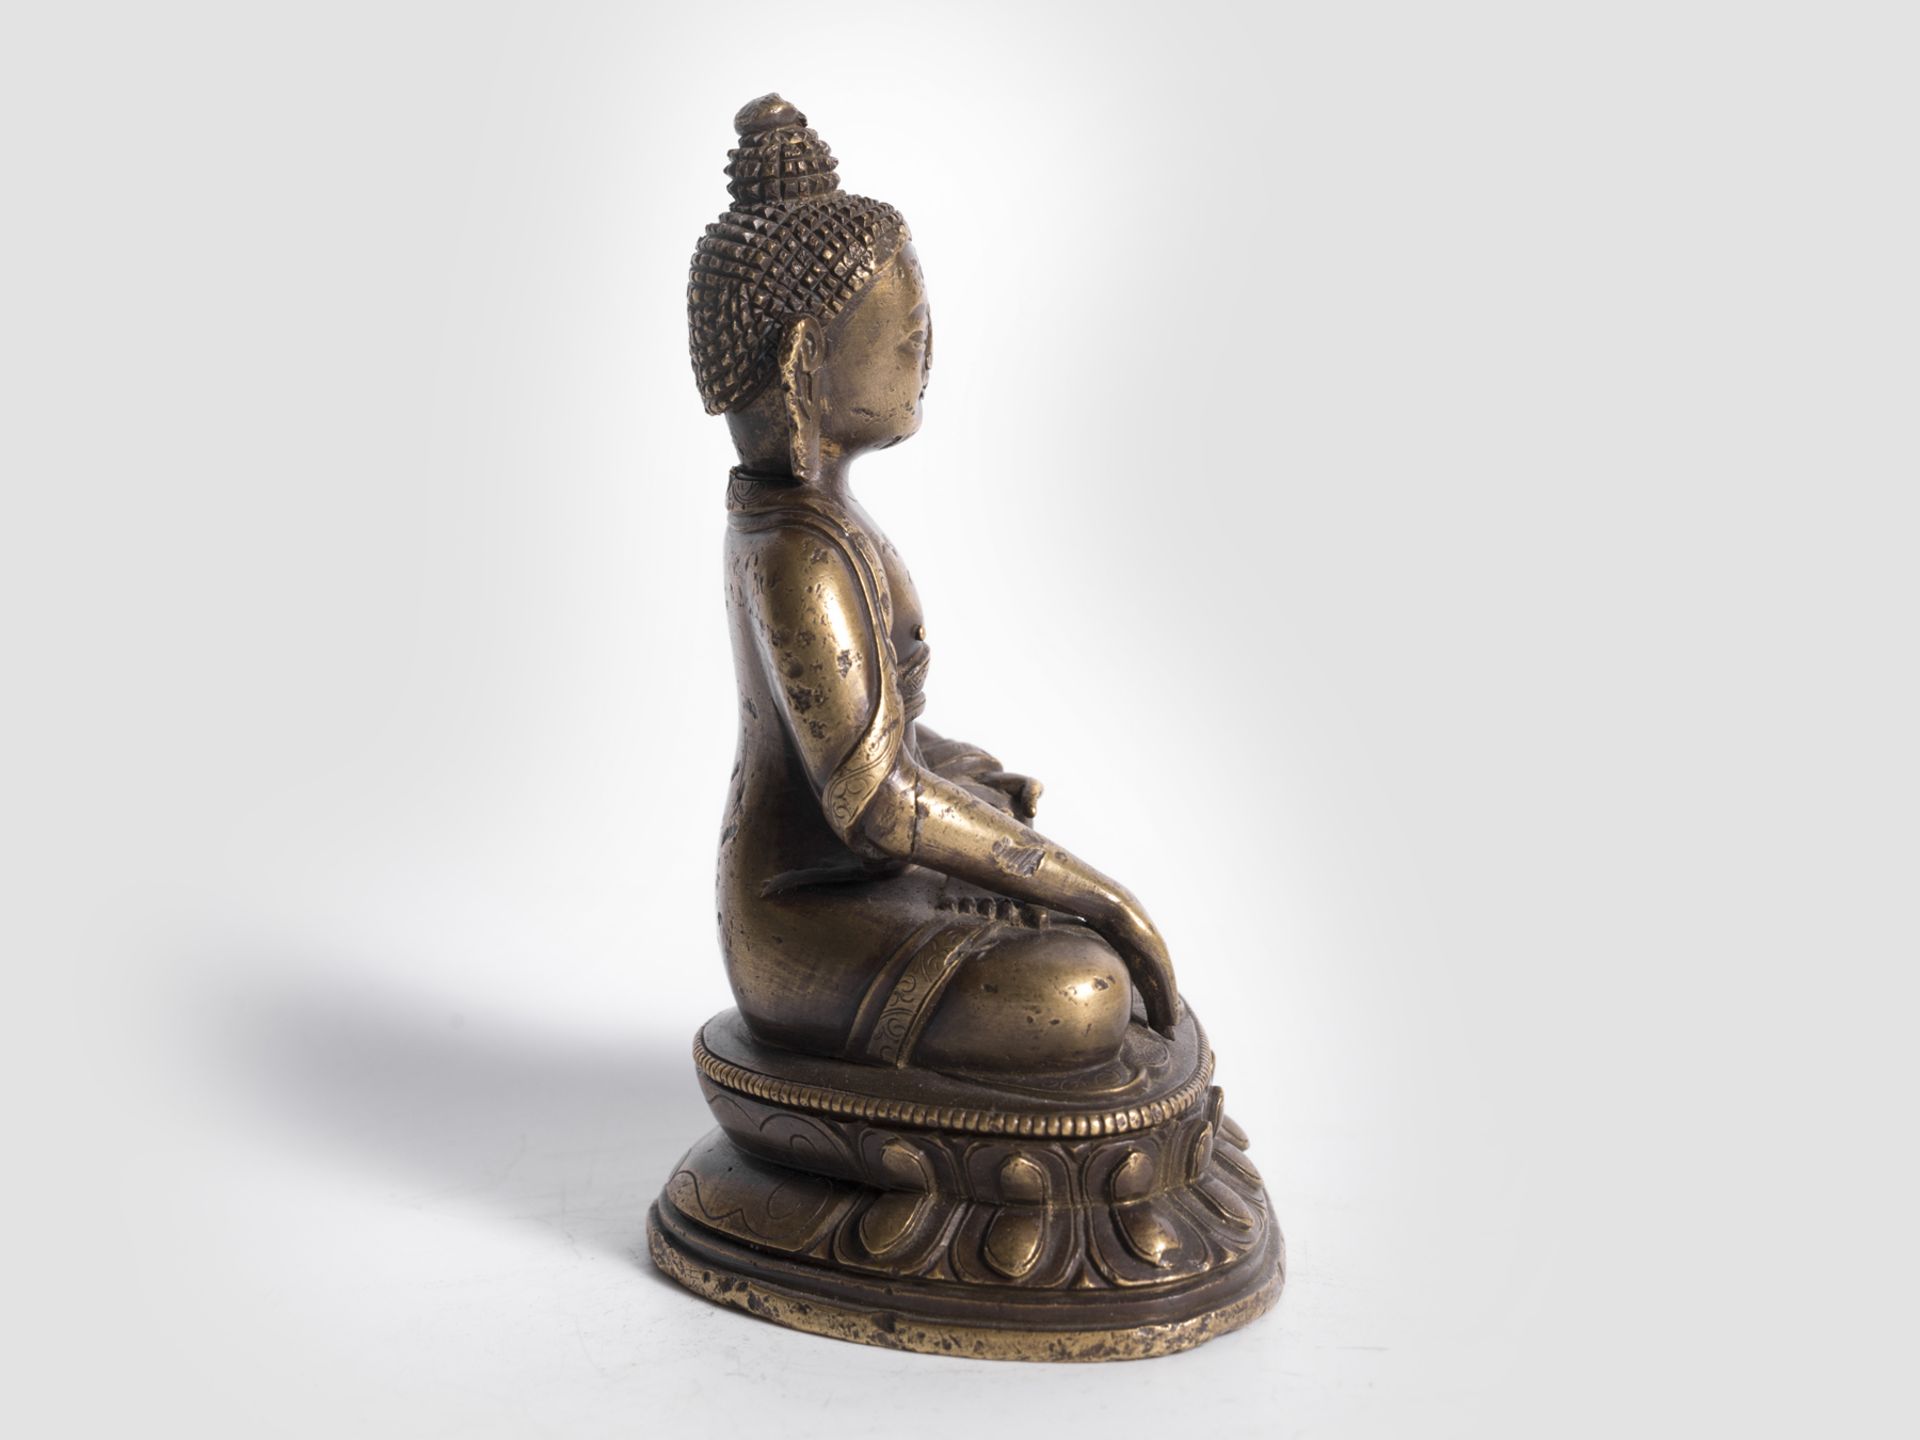 Sitting Buddha, Southeast Asia / Thailand?, 17th - 19th century or earlier - Image 3 of 5